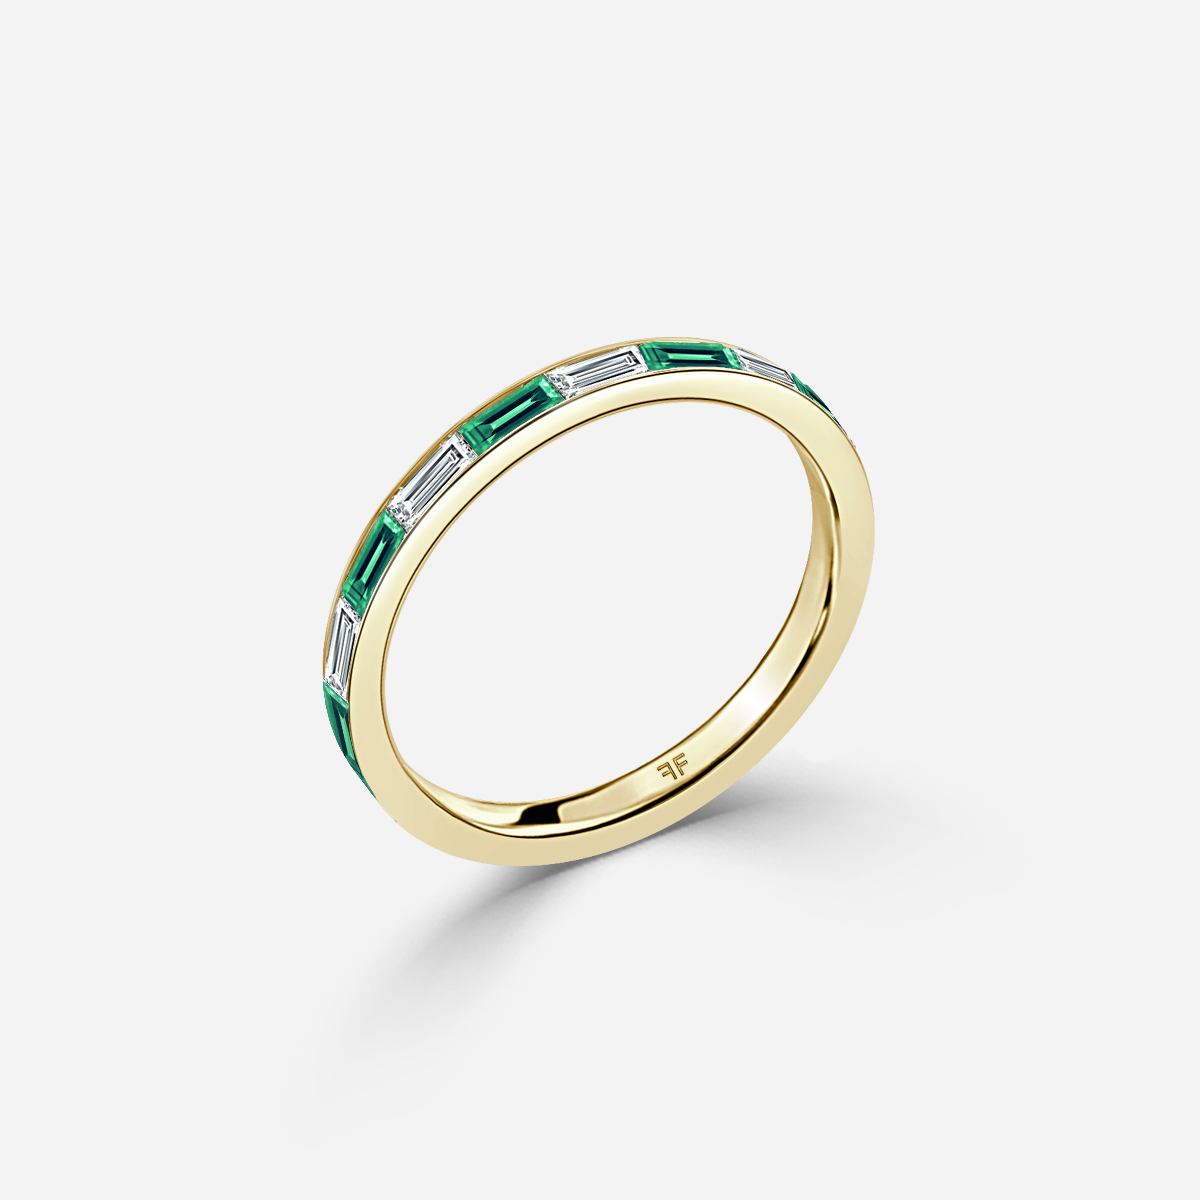 Baguette Cut Emerald And Diamond Wedding Ring In Yellow Gold